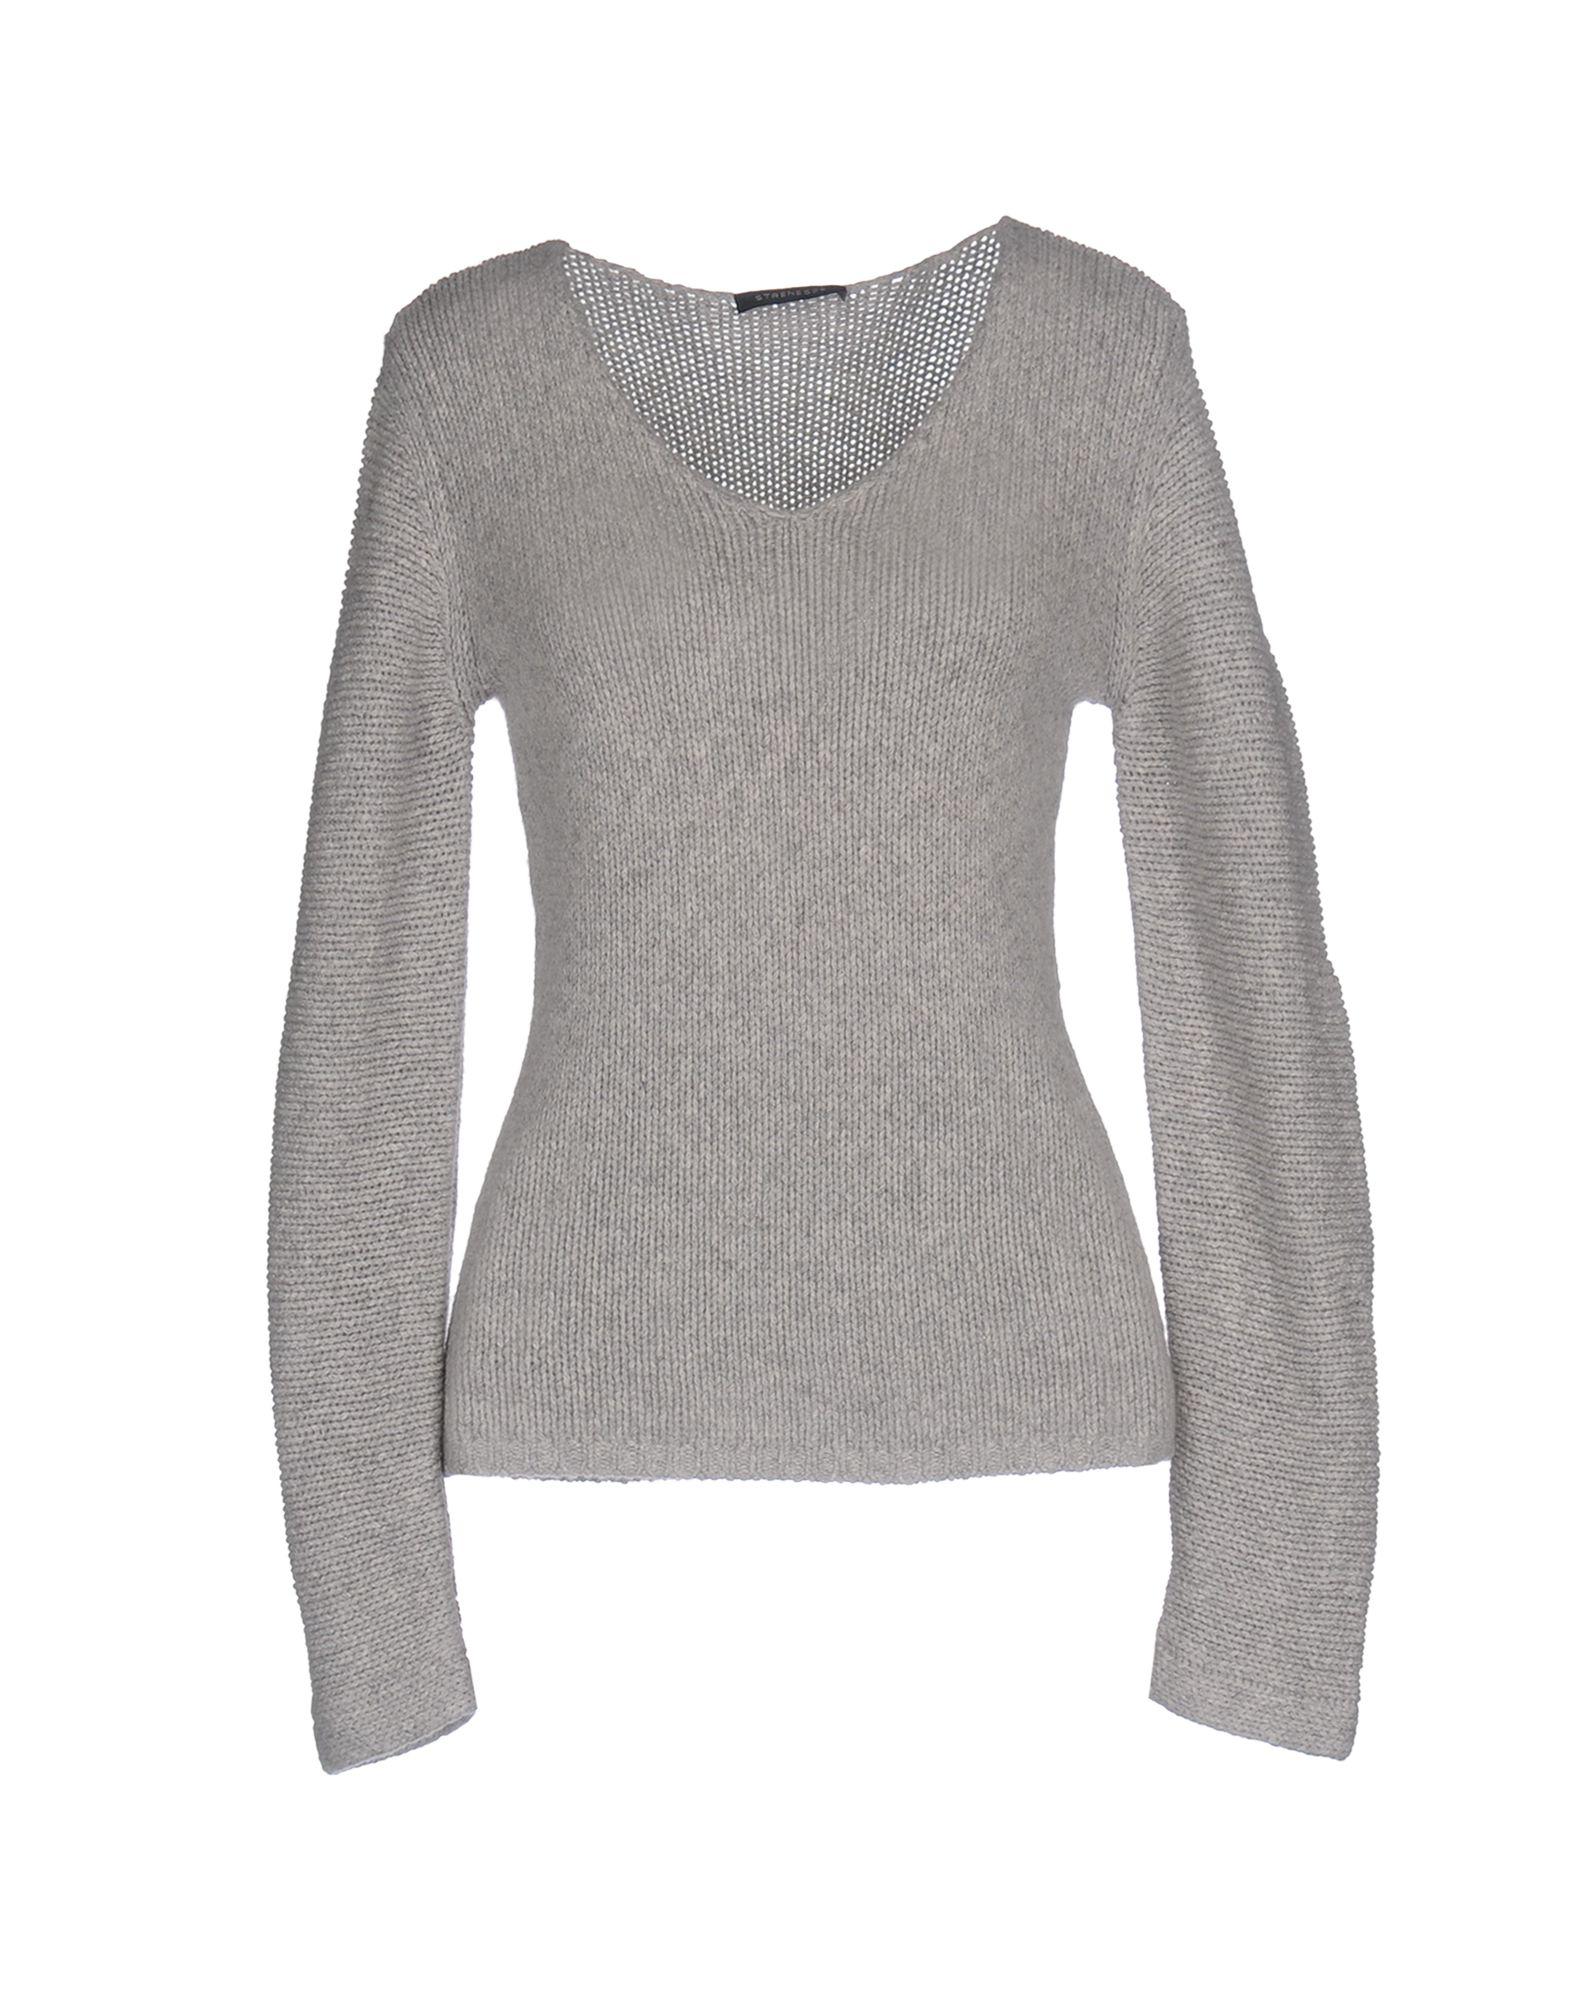 Lyst - Strenesse Sweater in Gray